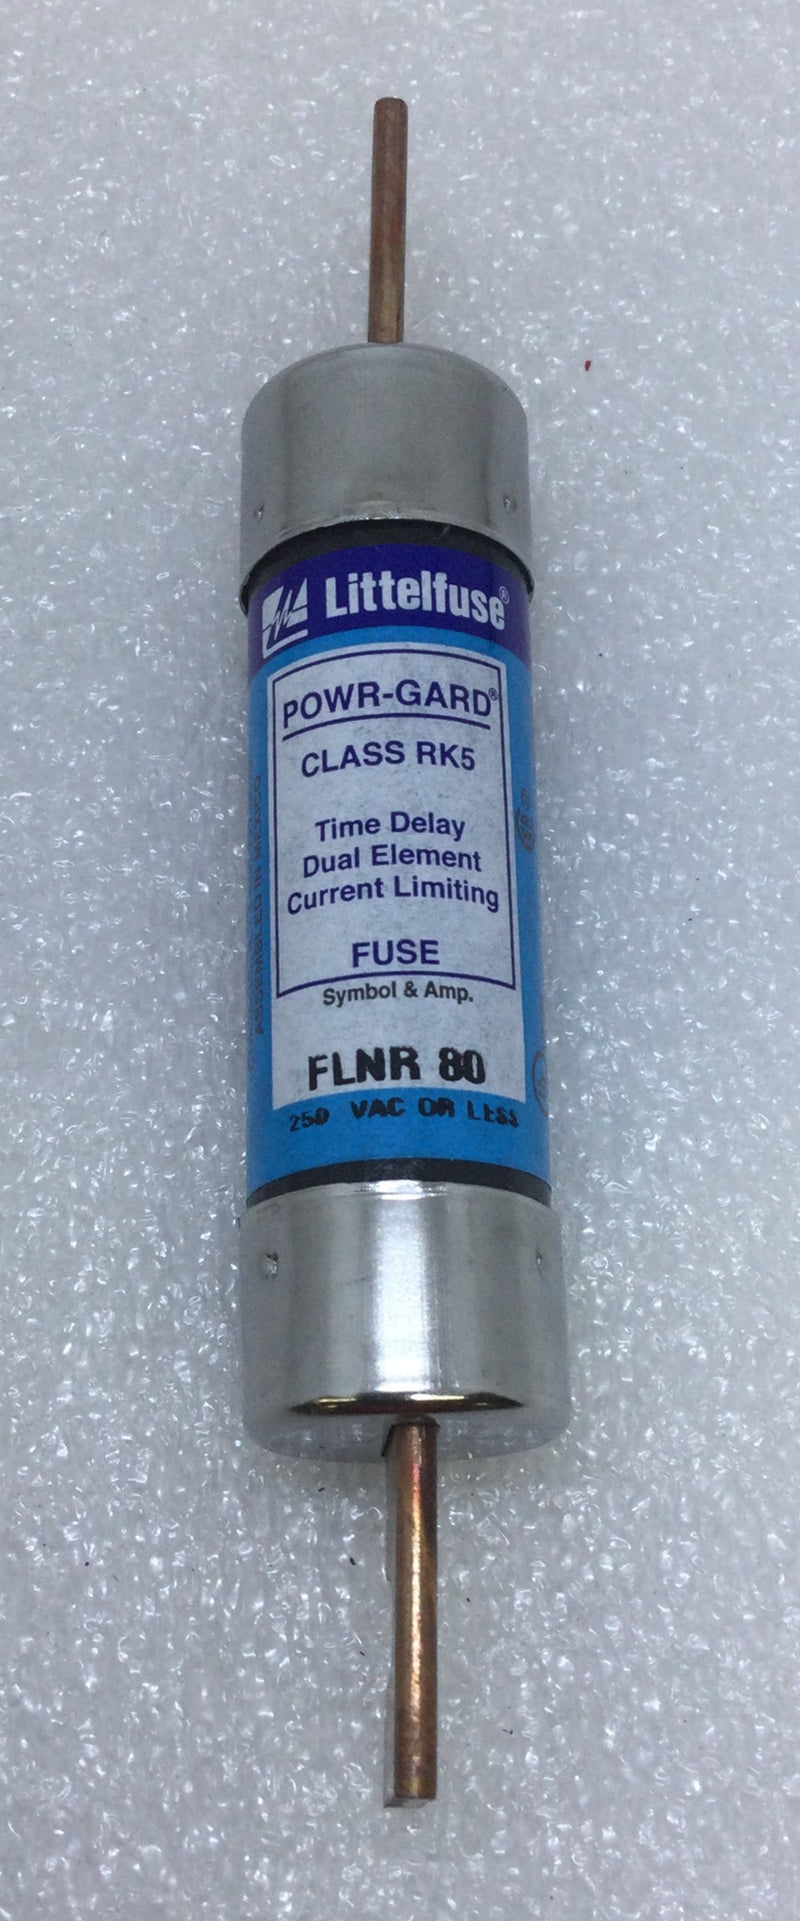 Littelfuse Slo Blo Fuse FLNR80 80 Amp 250VAC Class RK-5 Time Delay Dual Element Current Limiting Fuse